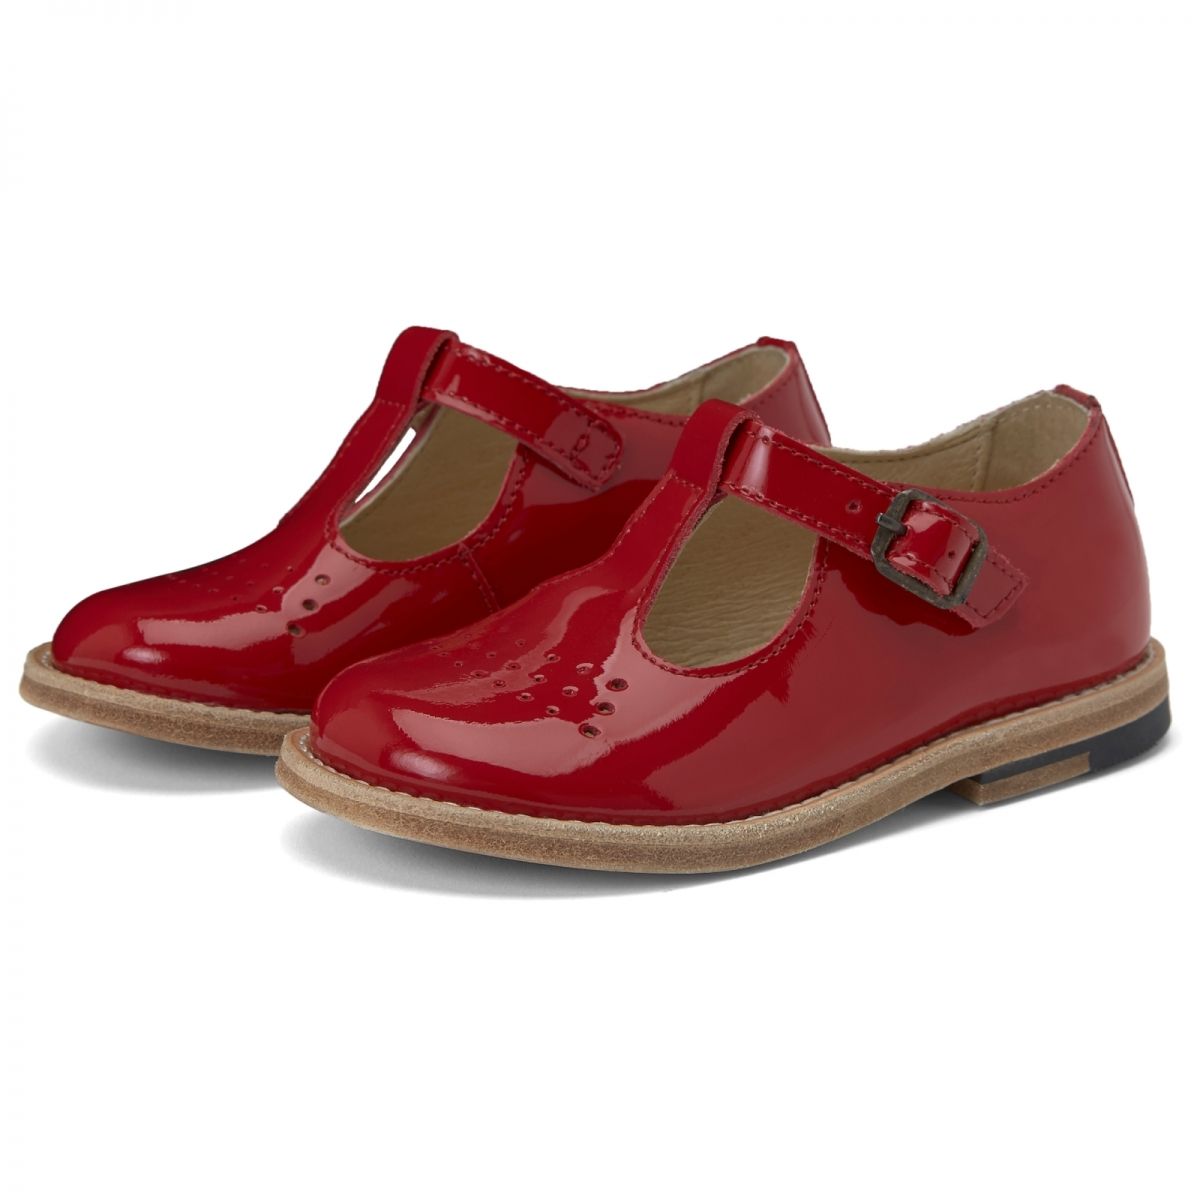 Young Soles T-bar Shoe Dottie Patent Leather london red